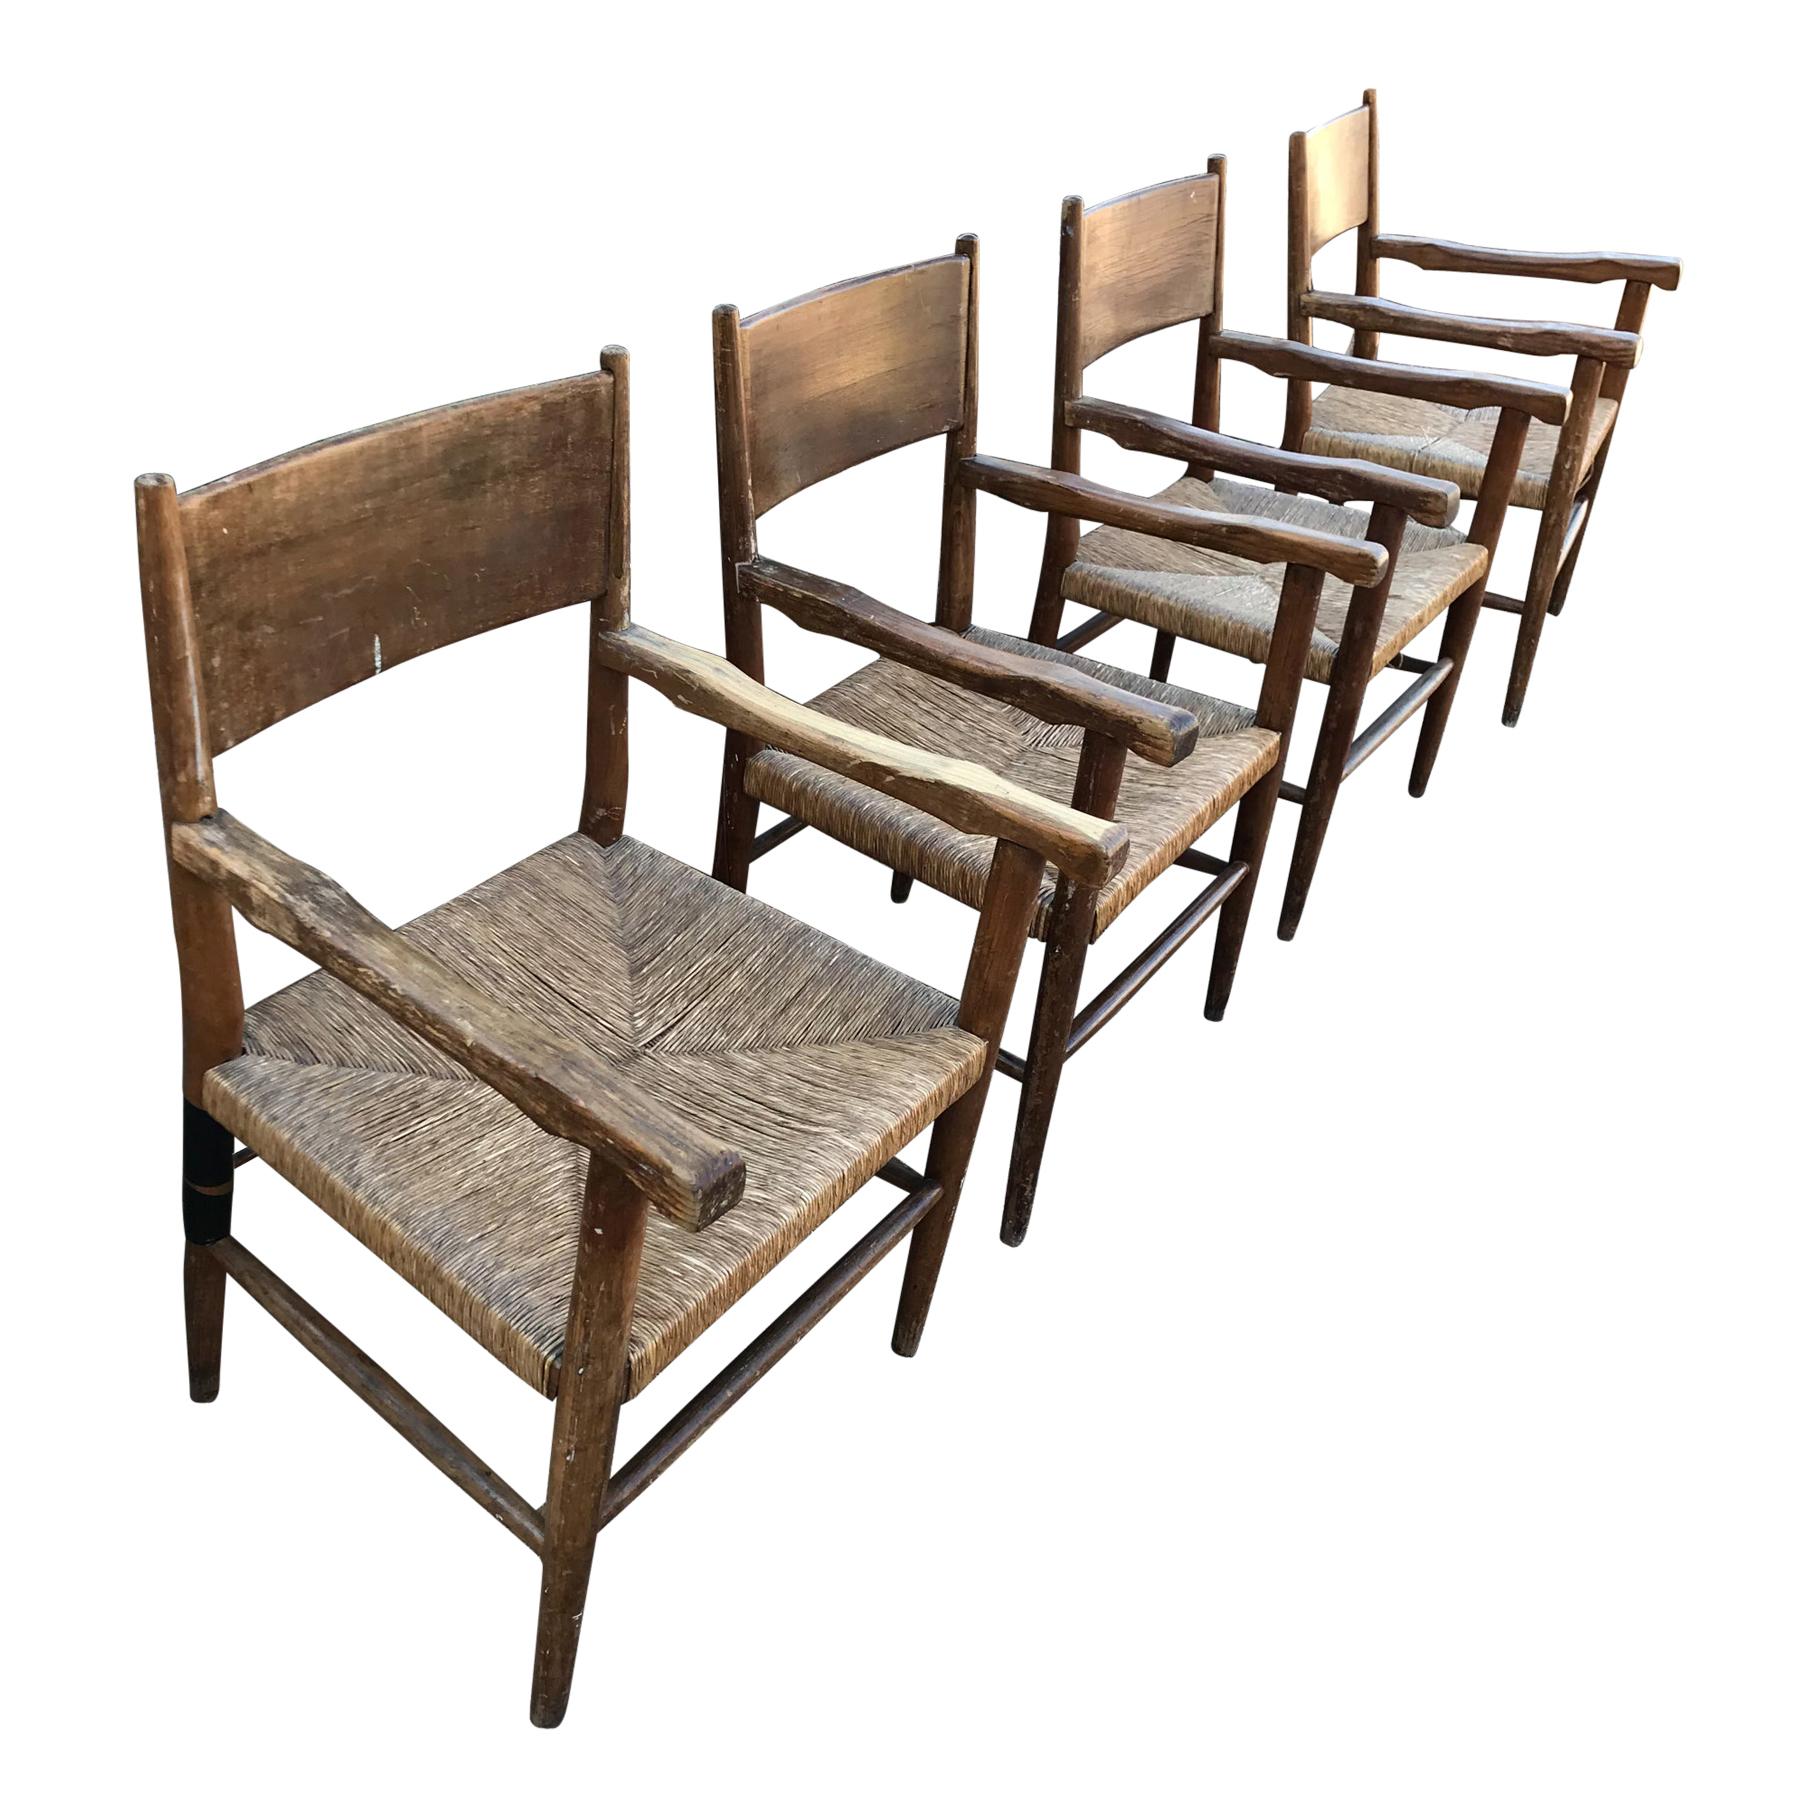 Spanish Hacienda Vintage Mexico Set of Four Chairs Seagrass & Rustic Wood 1950s